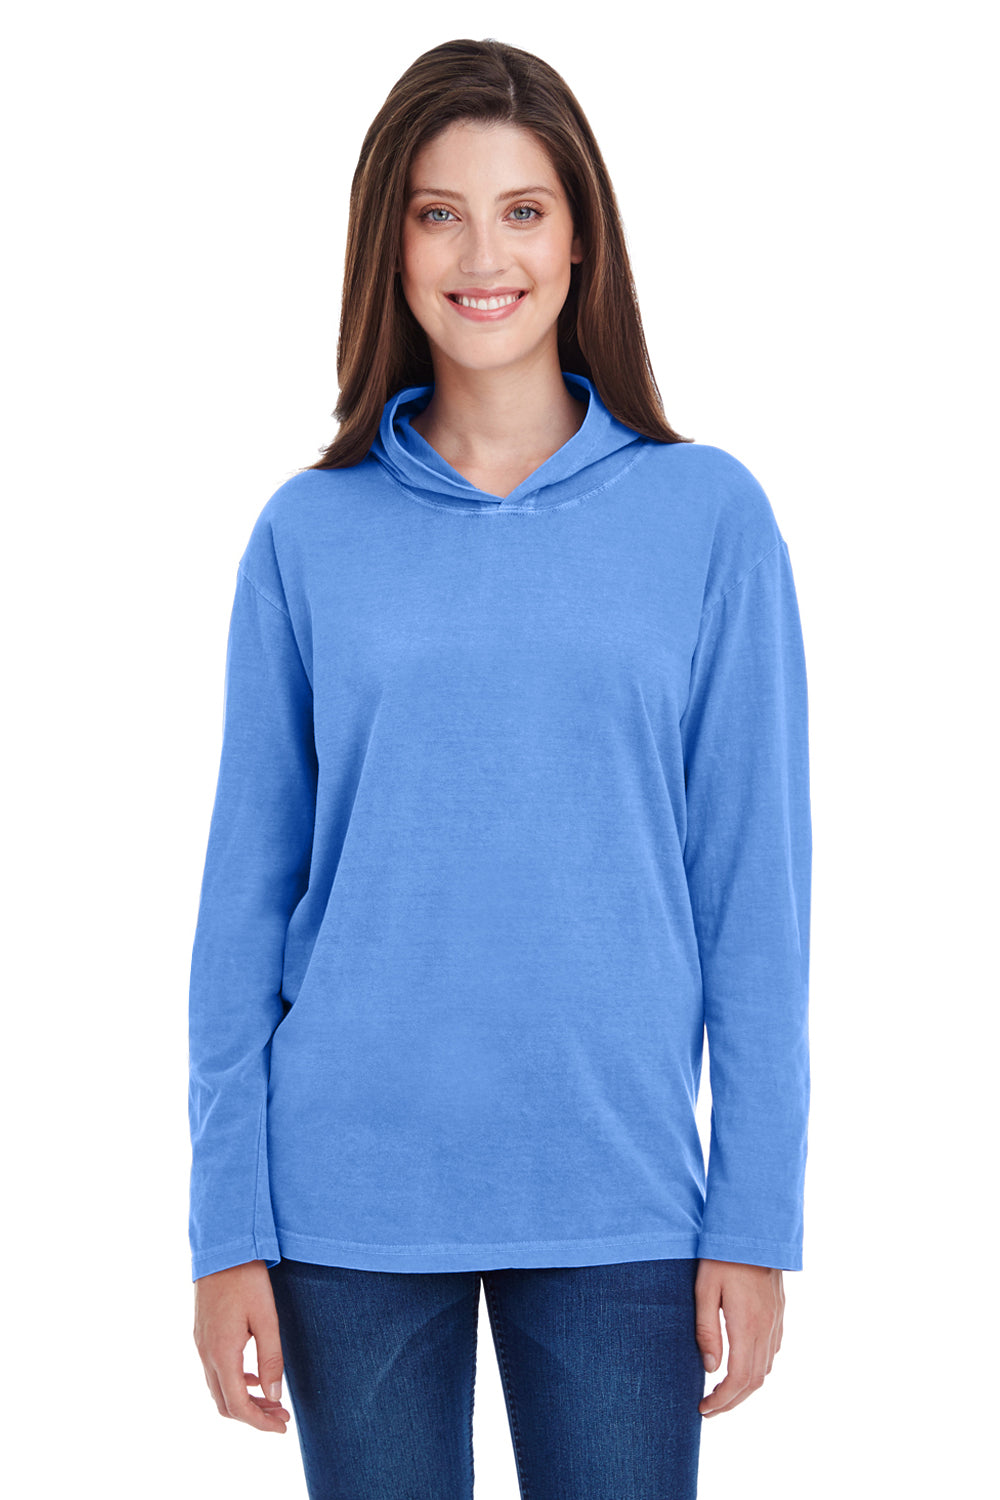 Comfort Colors 4900 Mens Long Sleeve Hooded T-Shirt Hoodie Flo Blue Front